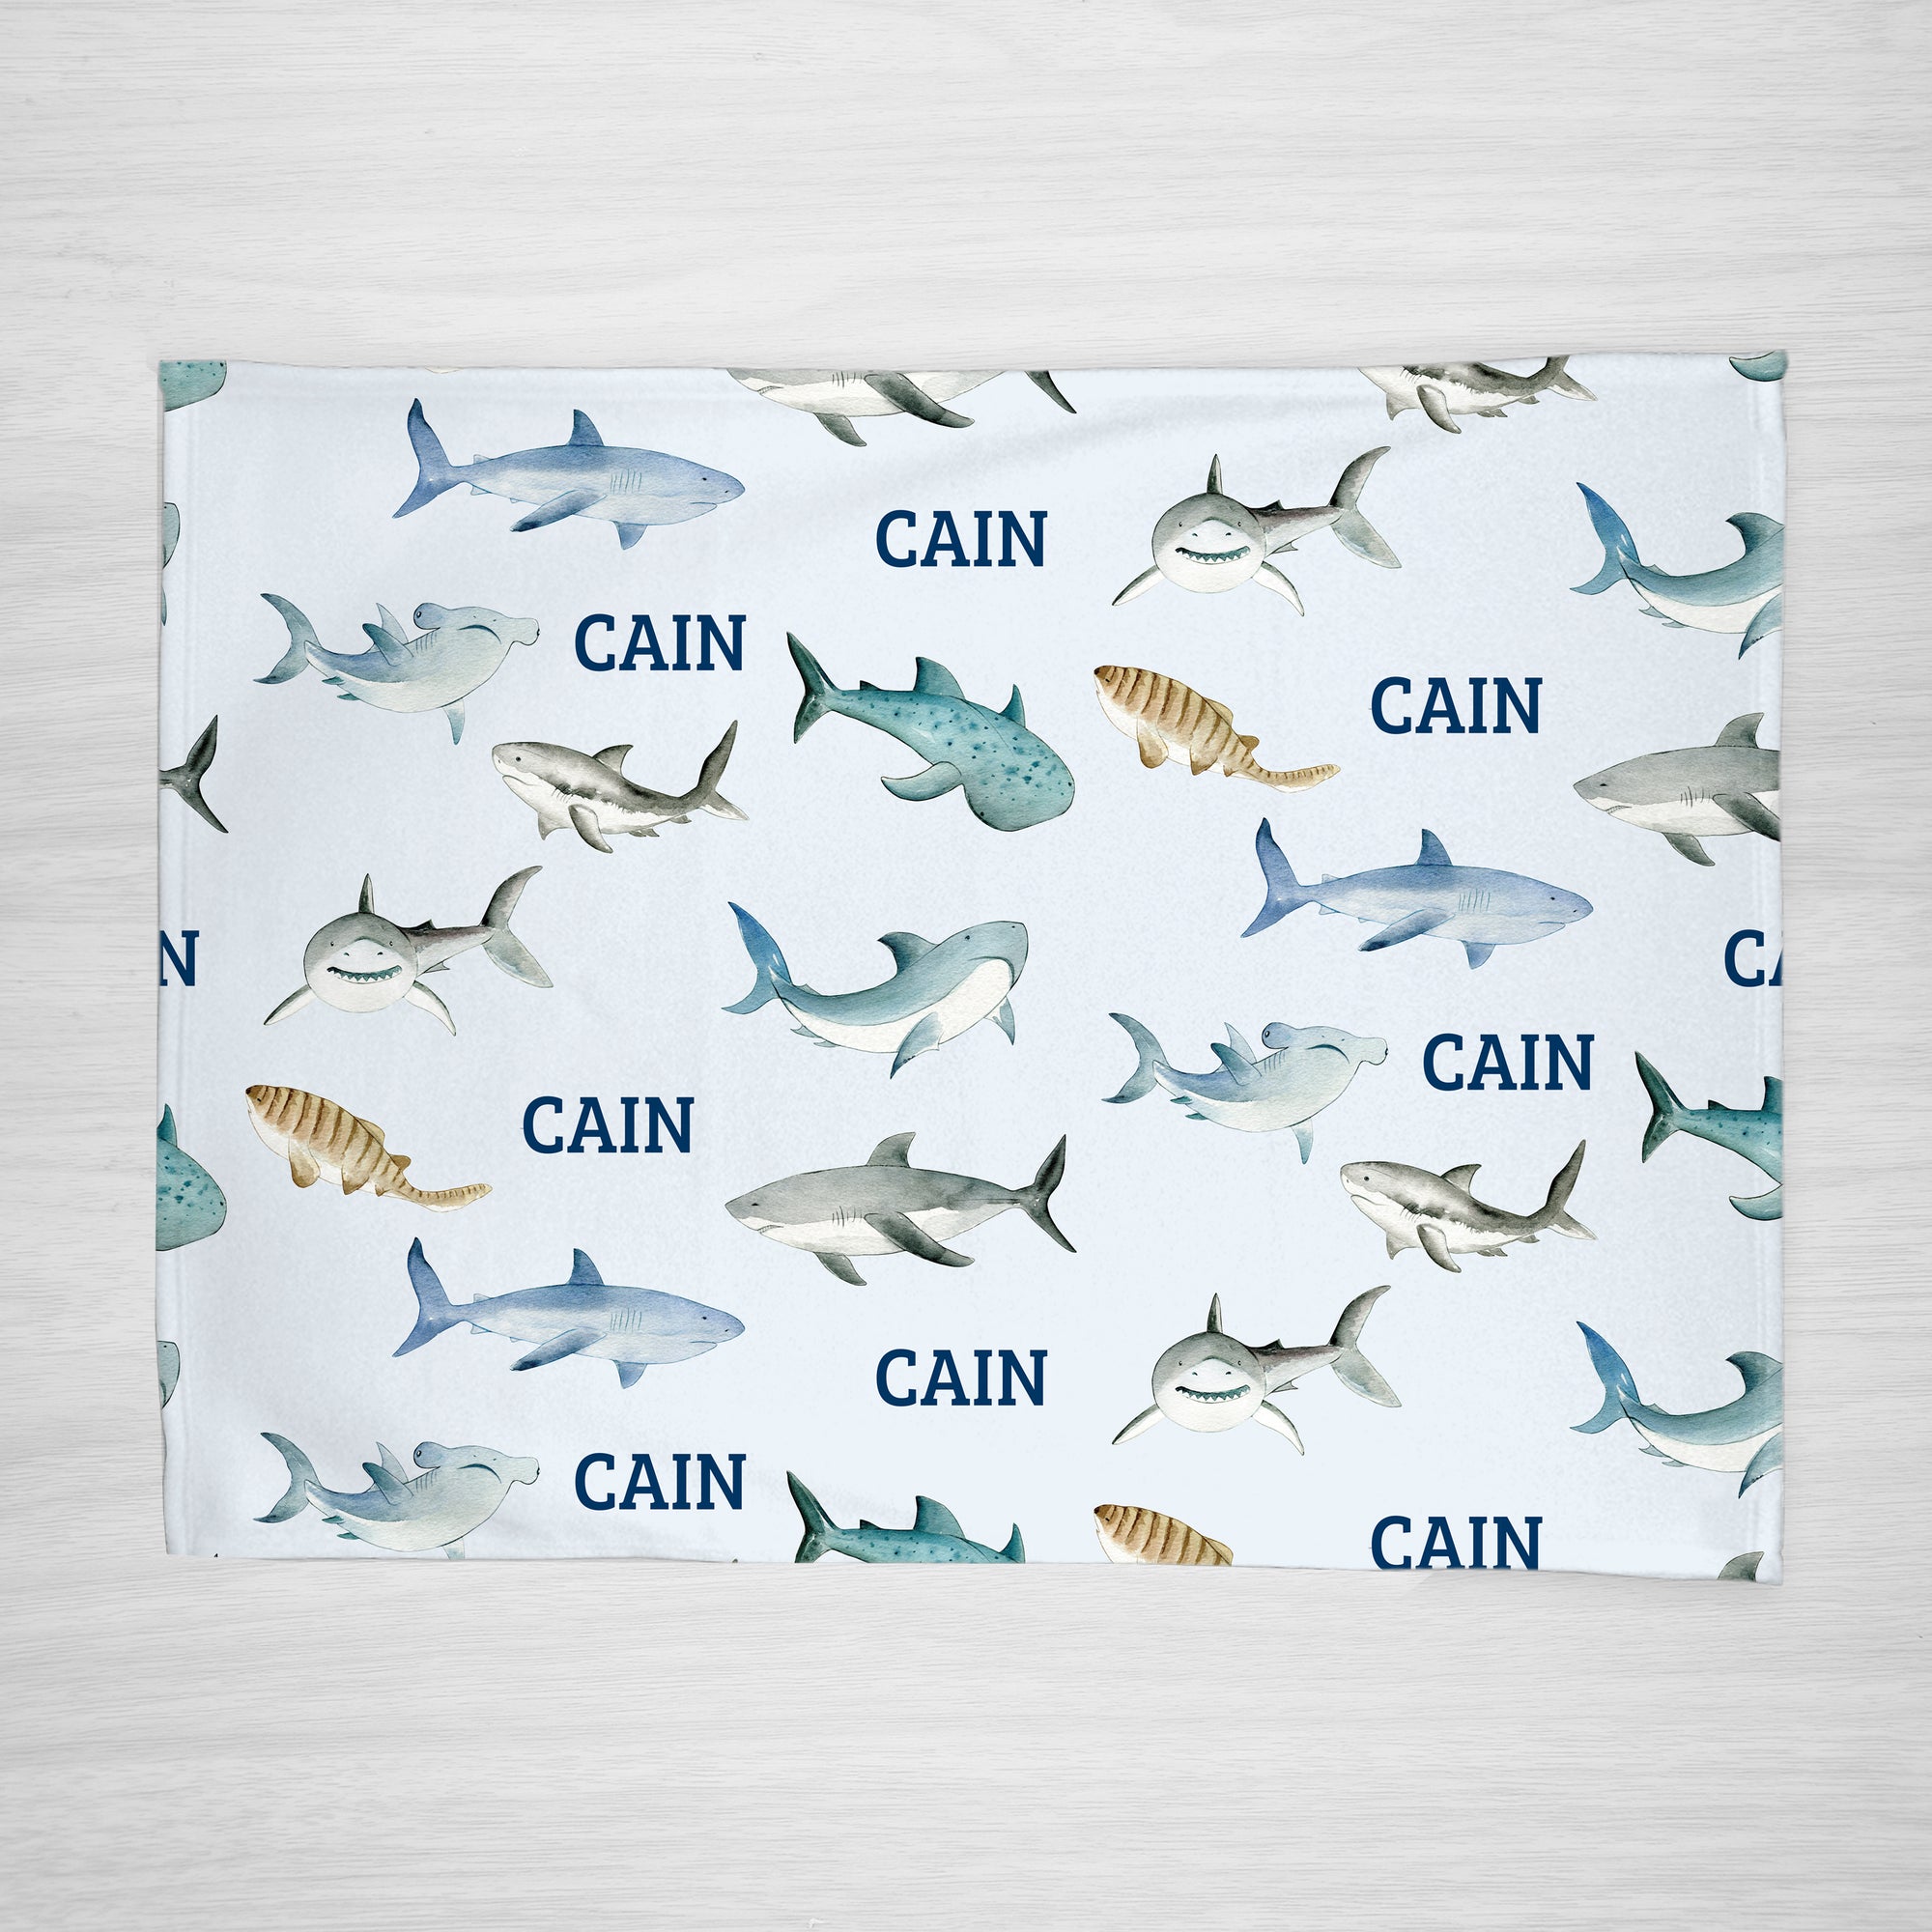 Our personalized shark blanket has your child's name and an assortment of sharks (tiger shark, hammer head shark, whale shark and more). Choose a smaller size for a stroller blanket, or one of our huge sherpa blankets for a snuggle blanket that will be loved for years.